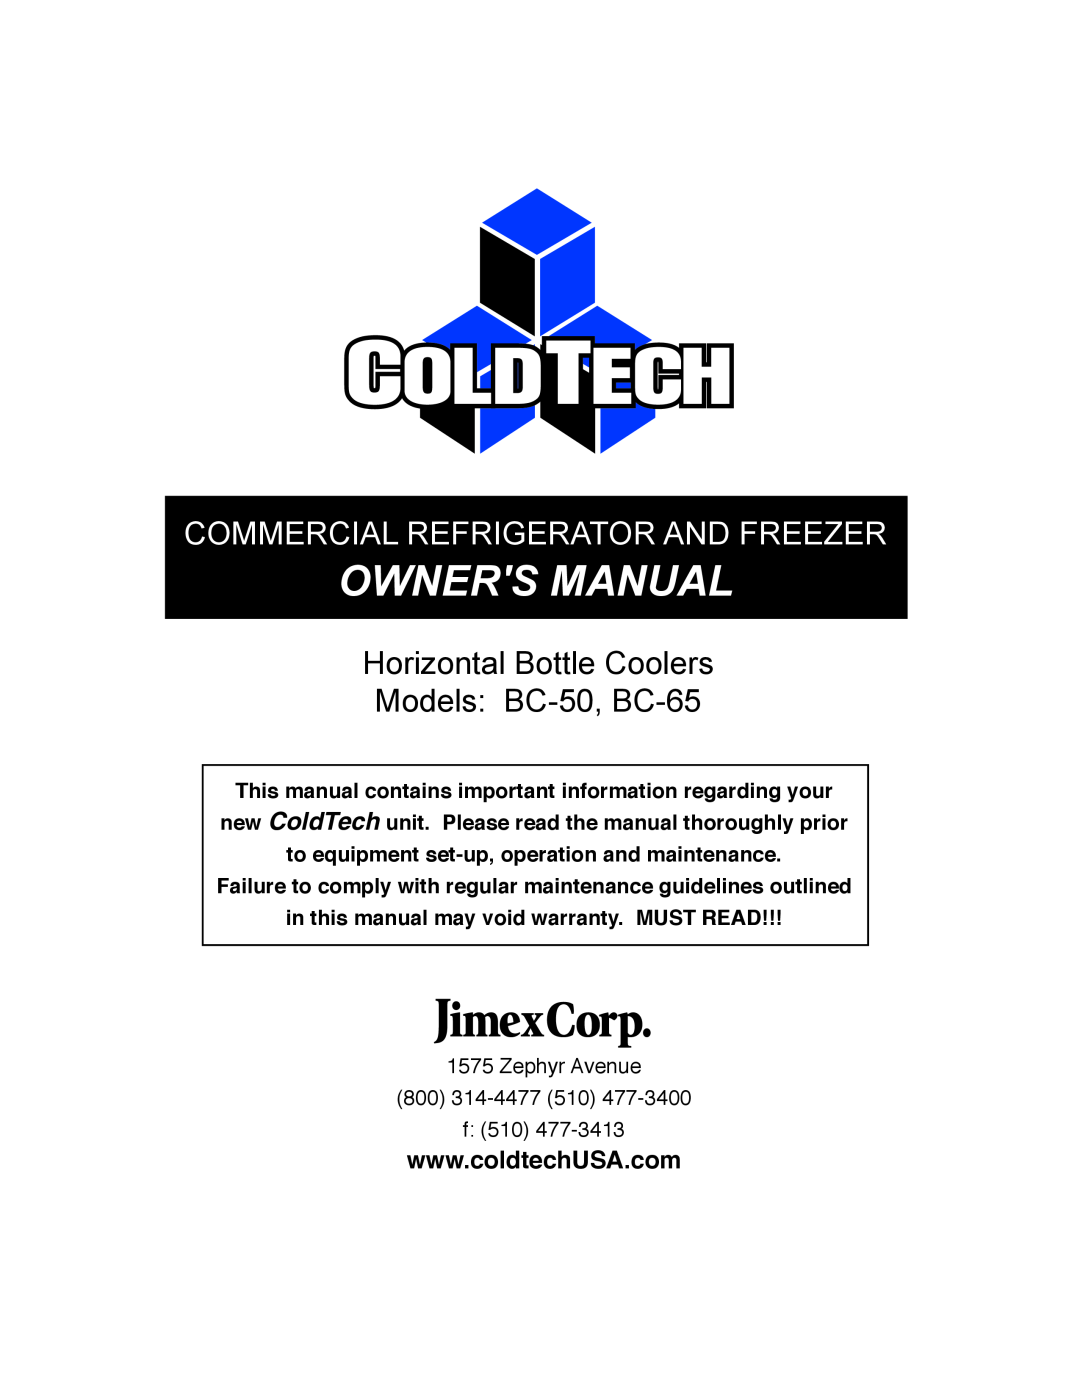 ColdTech owner manual Horizontal Bottle Coolers Models BC-50, BC-65, Commercial Refrigerator And Freezer 